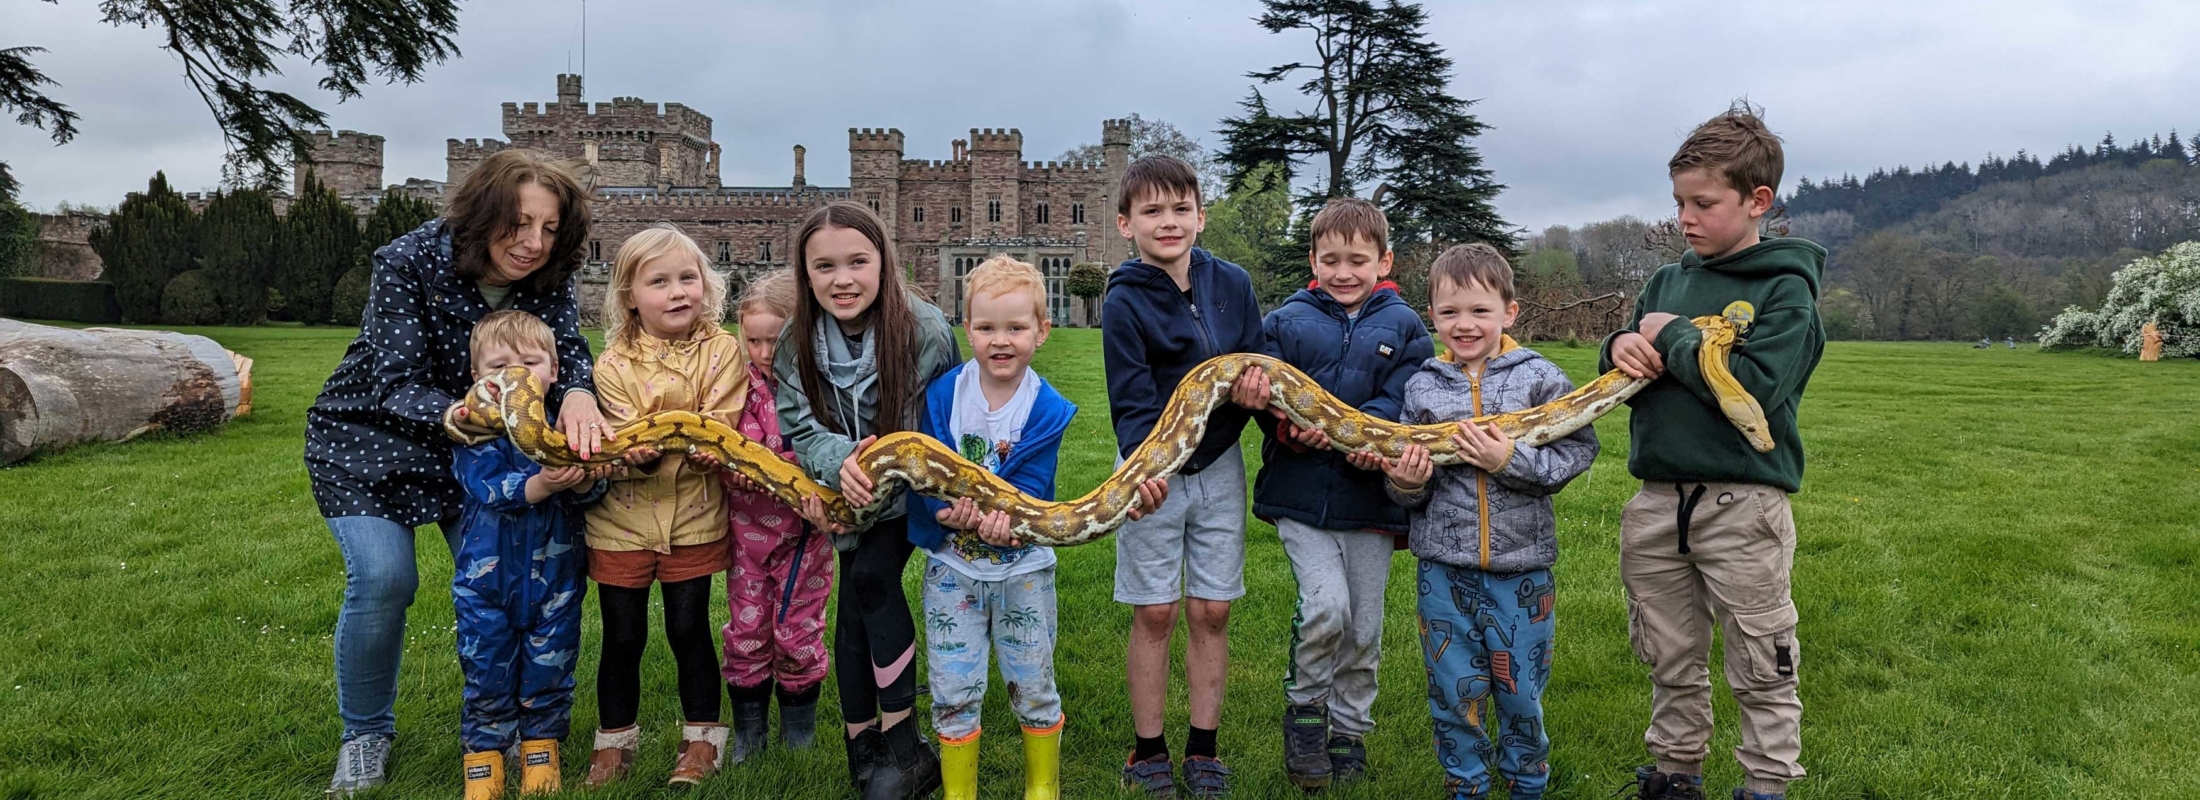 Children holding a snake during a fun day out at Herefordshire Castle